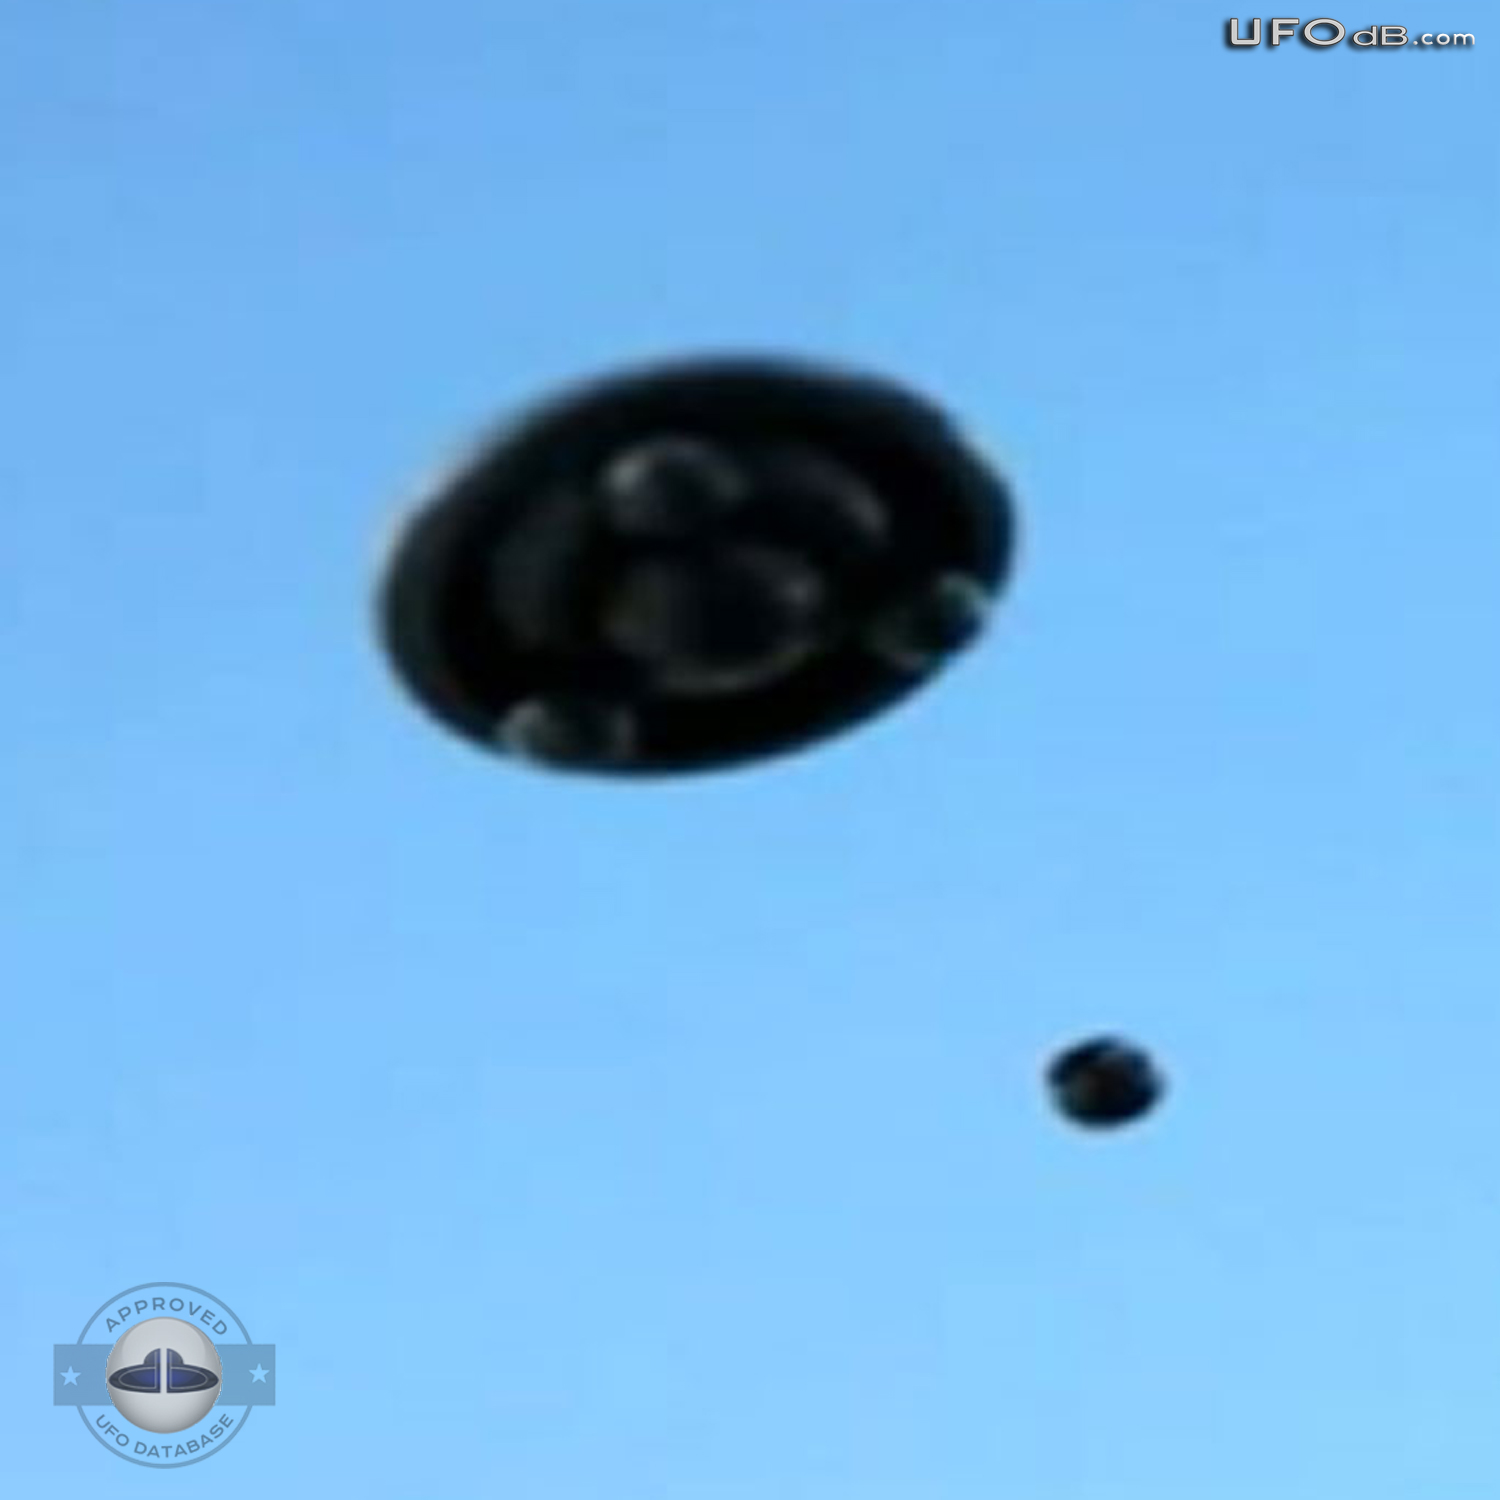 Italian UFO hunter captures on pictures a great 2011 UFO sighting UFO Picture #372-3